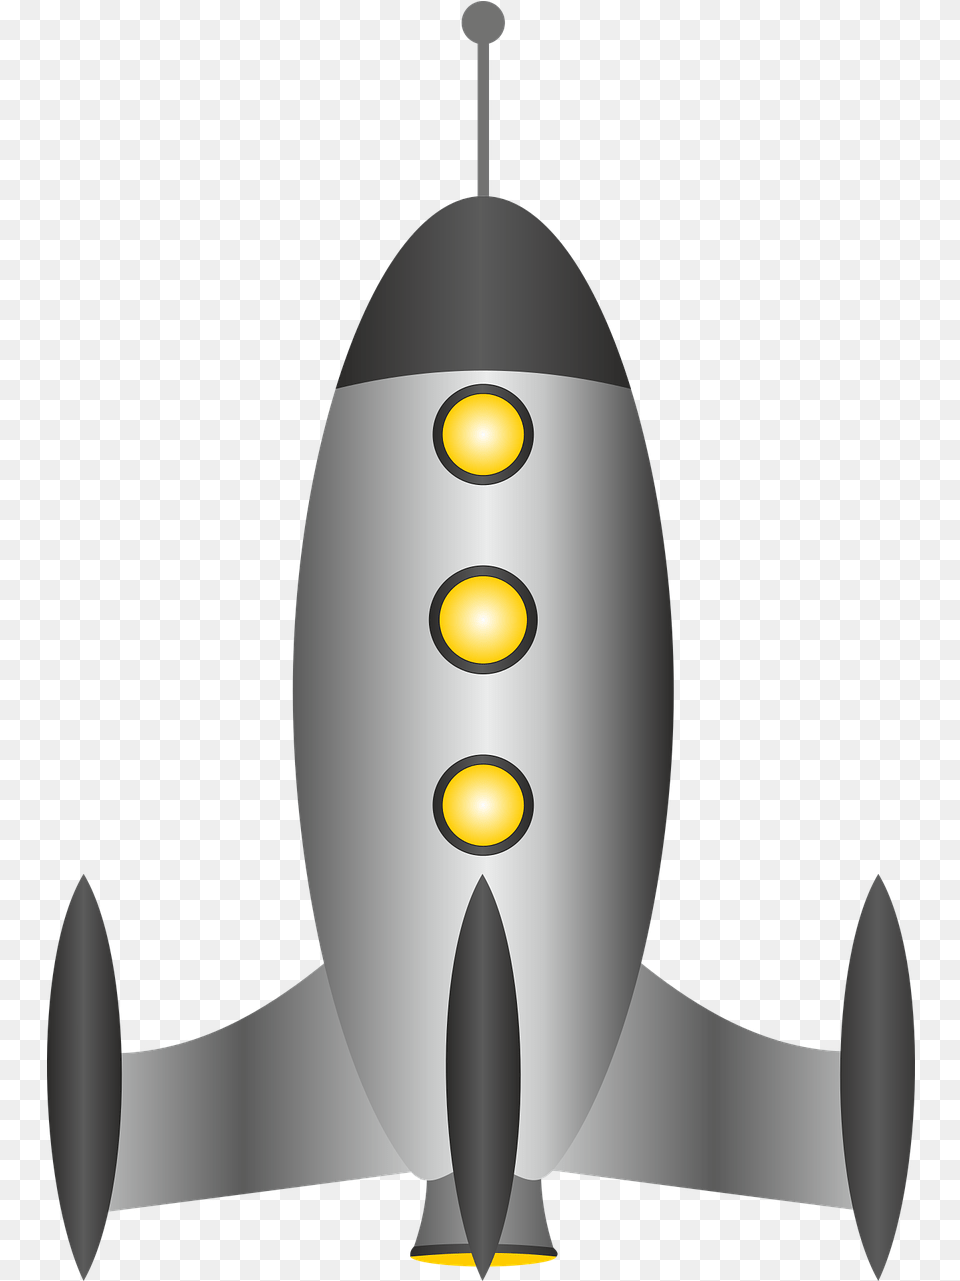 Rocket Spaceship Space Travel Free Vector Graphic On Pixabay Rakieta, Aircraft, Airliner, Airplane, Transportation Png Image